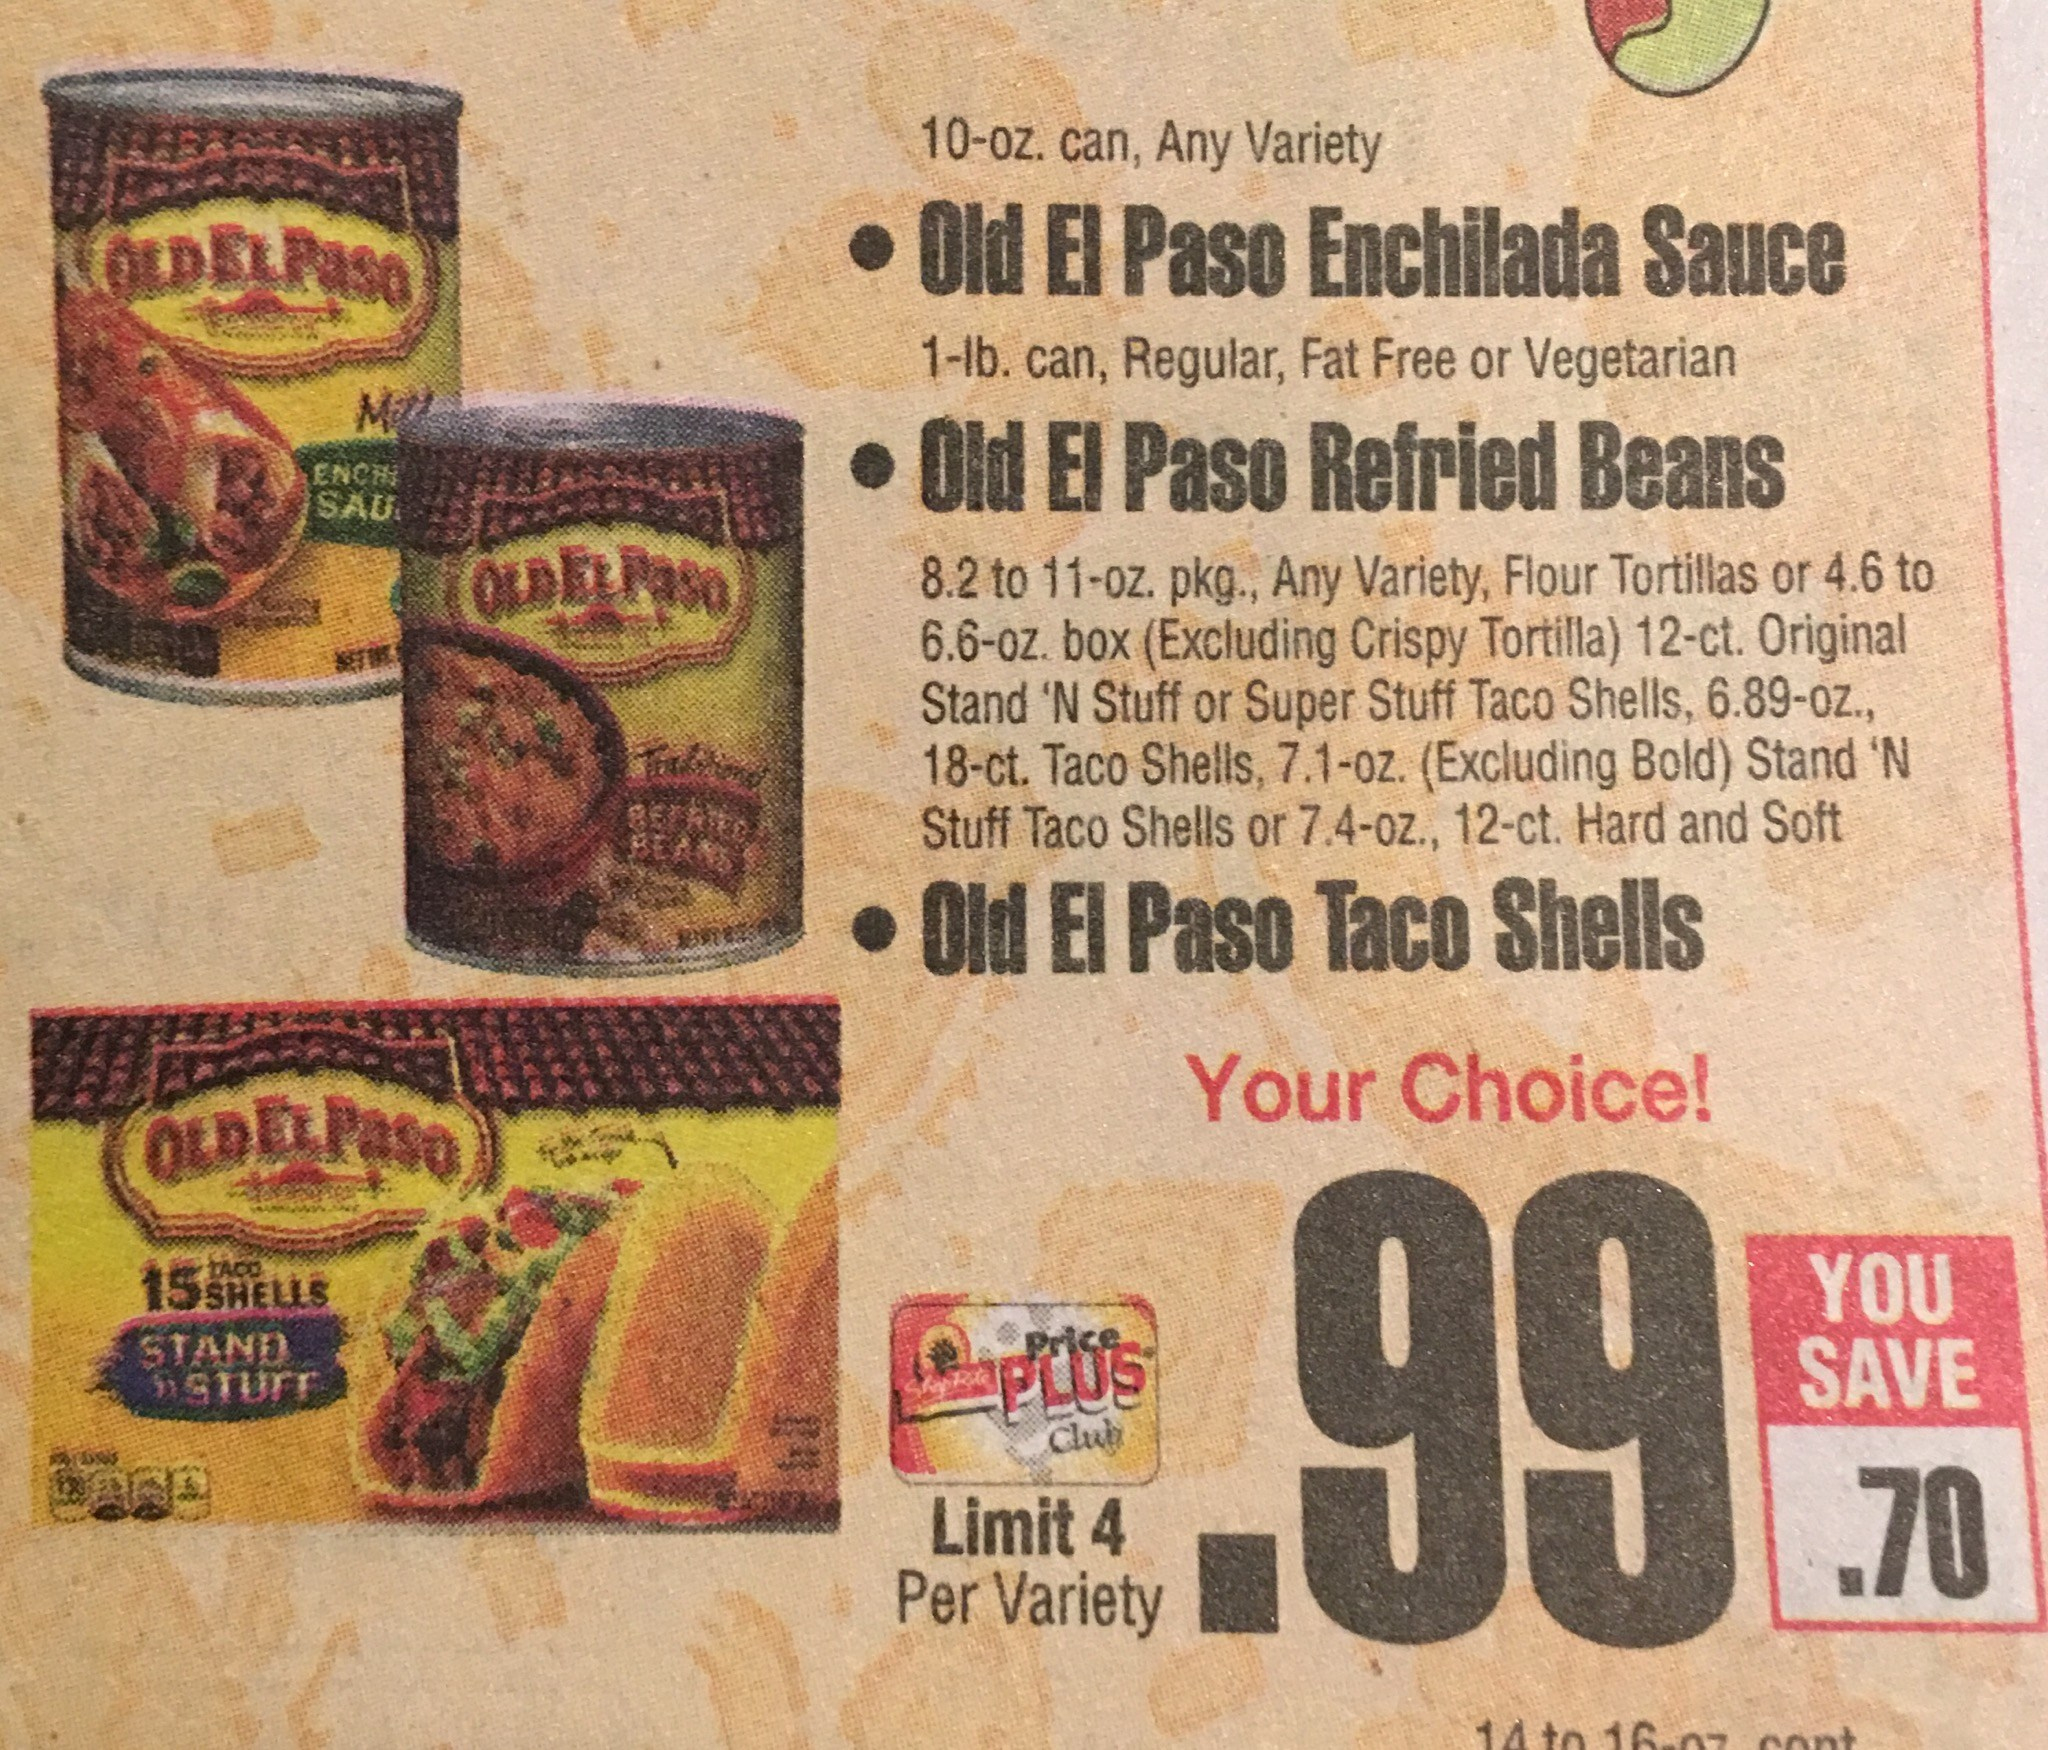 Free And Cheap Old El Paso Products Starting 1/21/18 - Free Printable Old El Paso Coupons